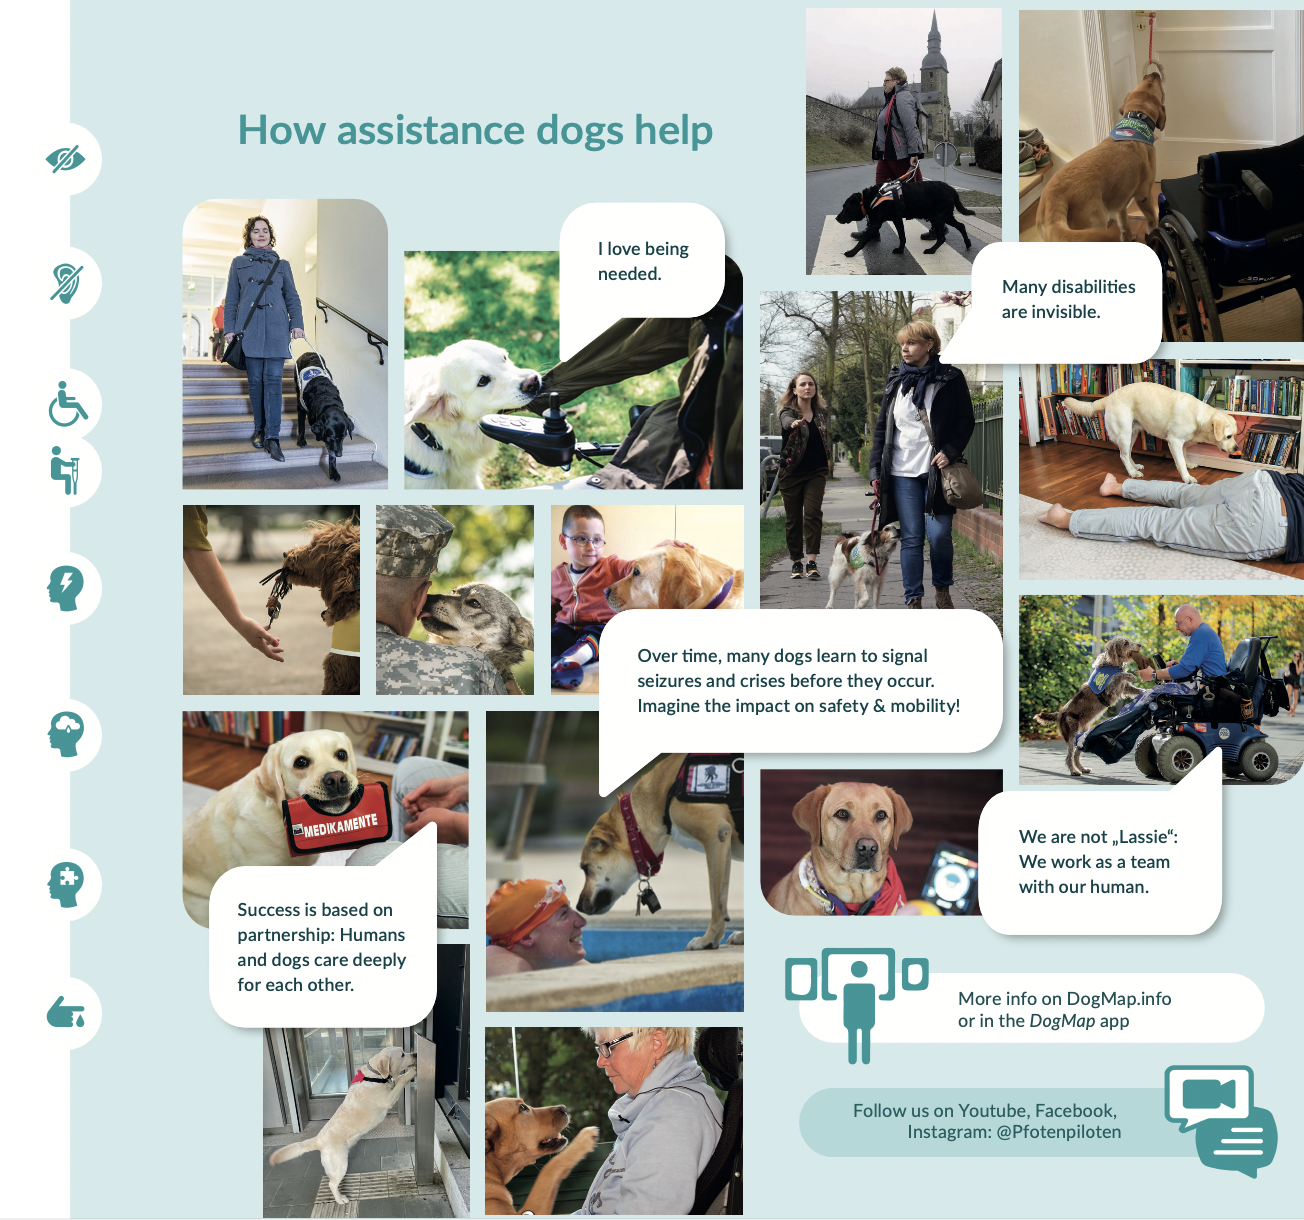 Different types of assistance dogs are presented with pictures and keywords.